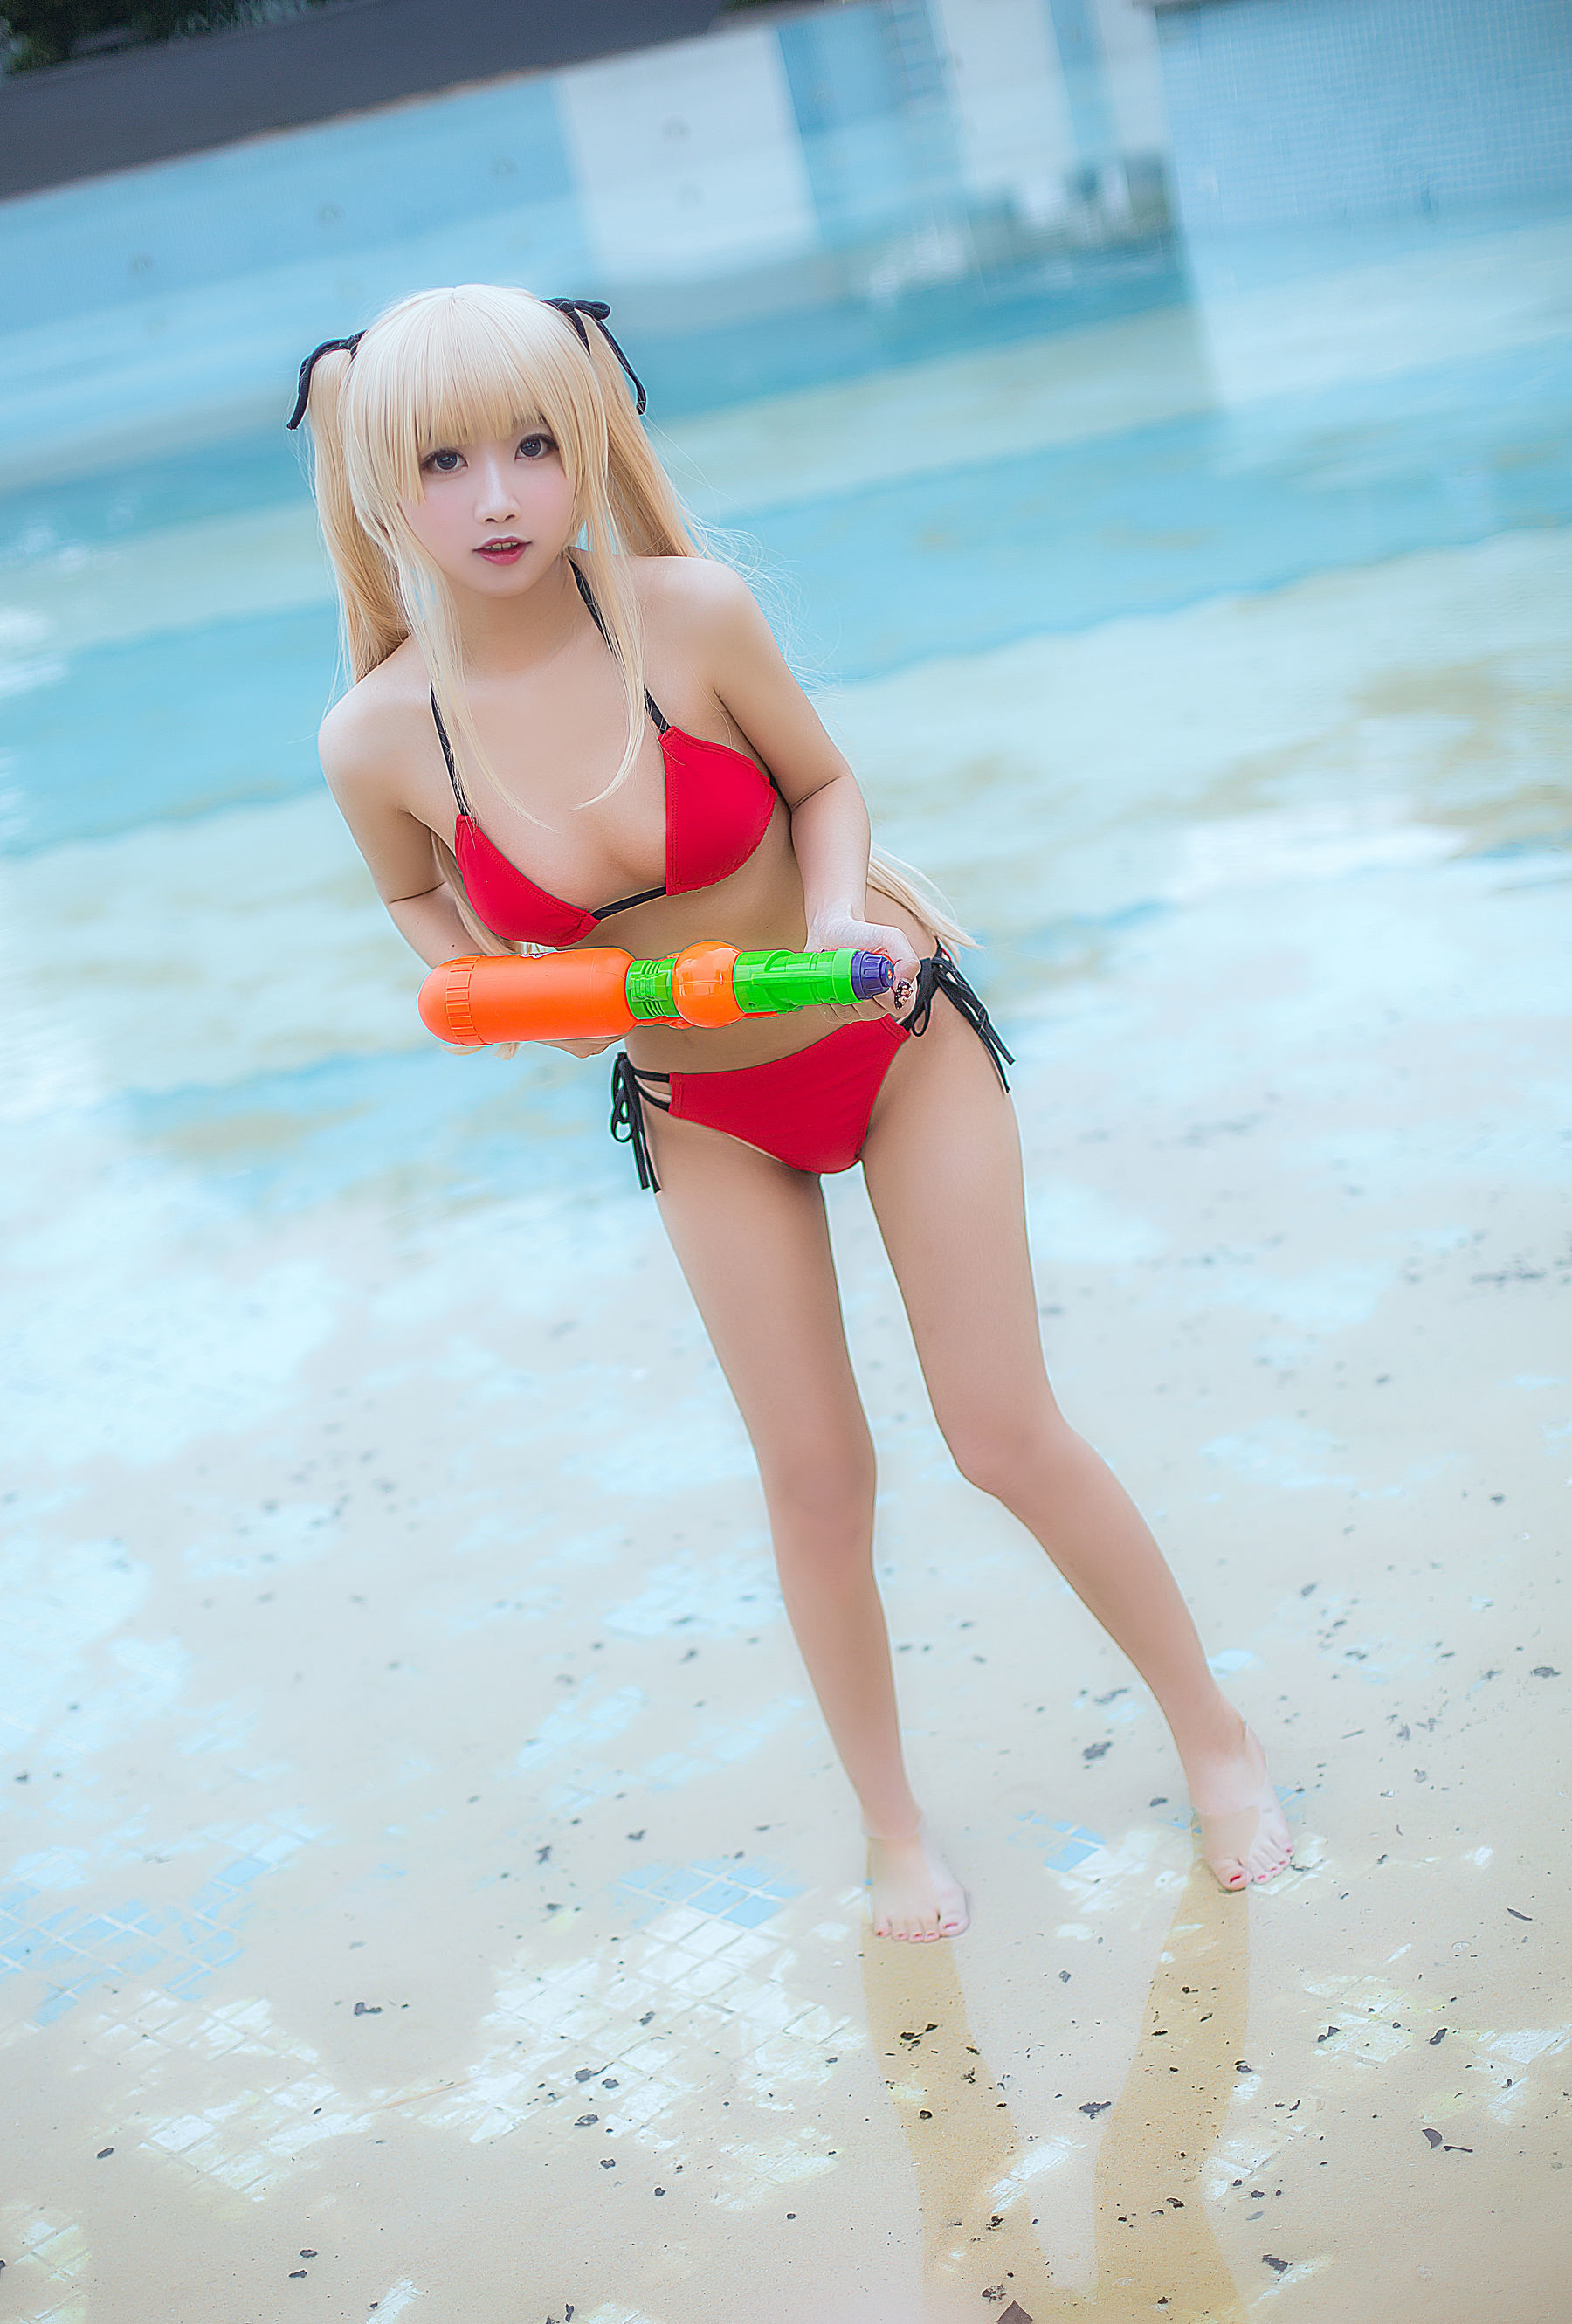 Ghost animals are not in W “Swimwear Women” [COSPLAY Welfare] Photo Collection